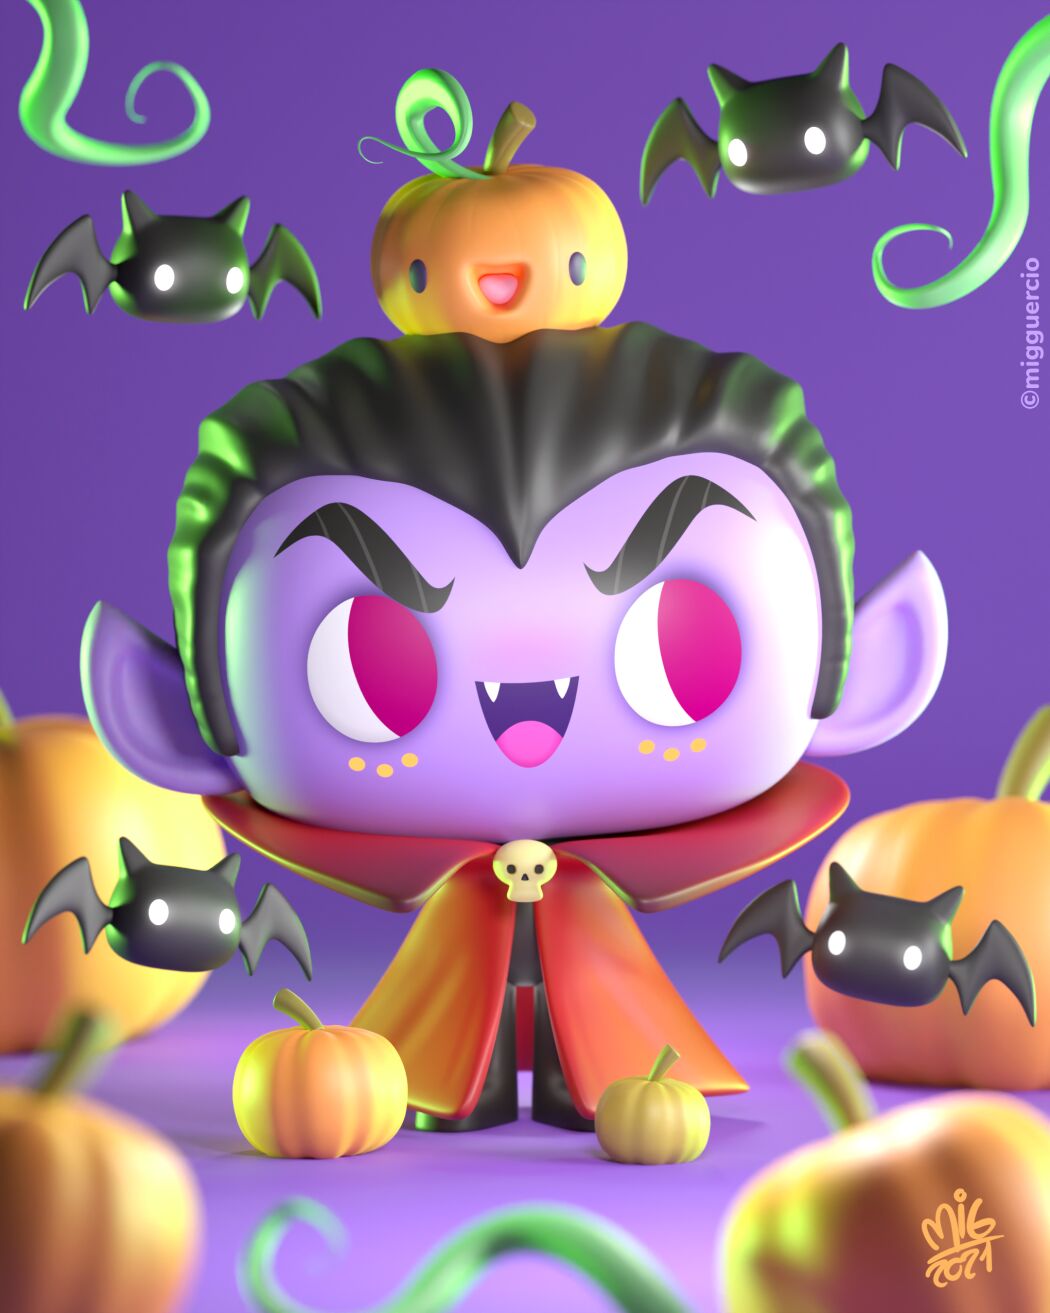 Halloween art and character design by Miguel Guercio